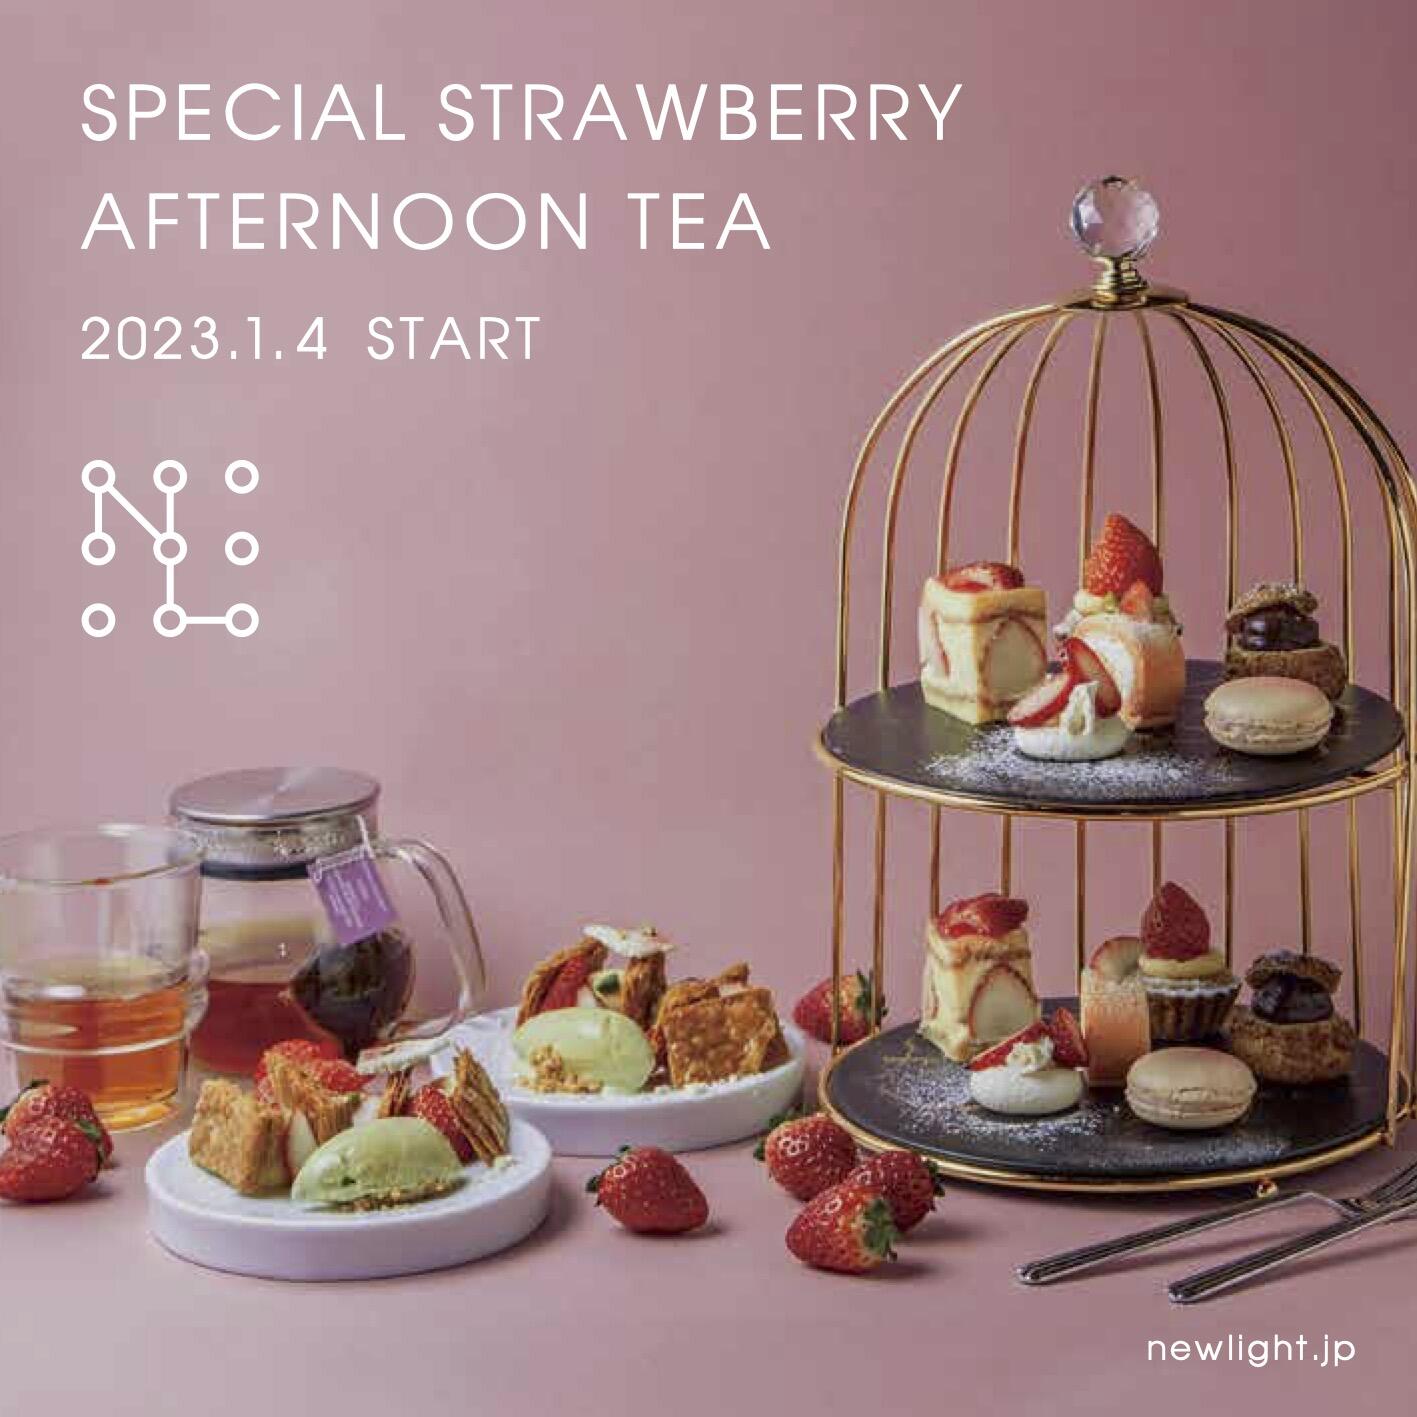 SPECIAL STRAWBERRY AFTERNOON TEA